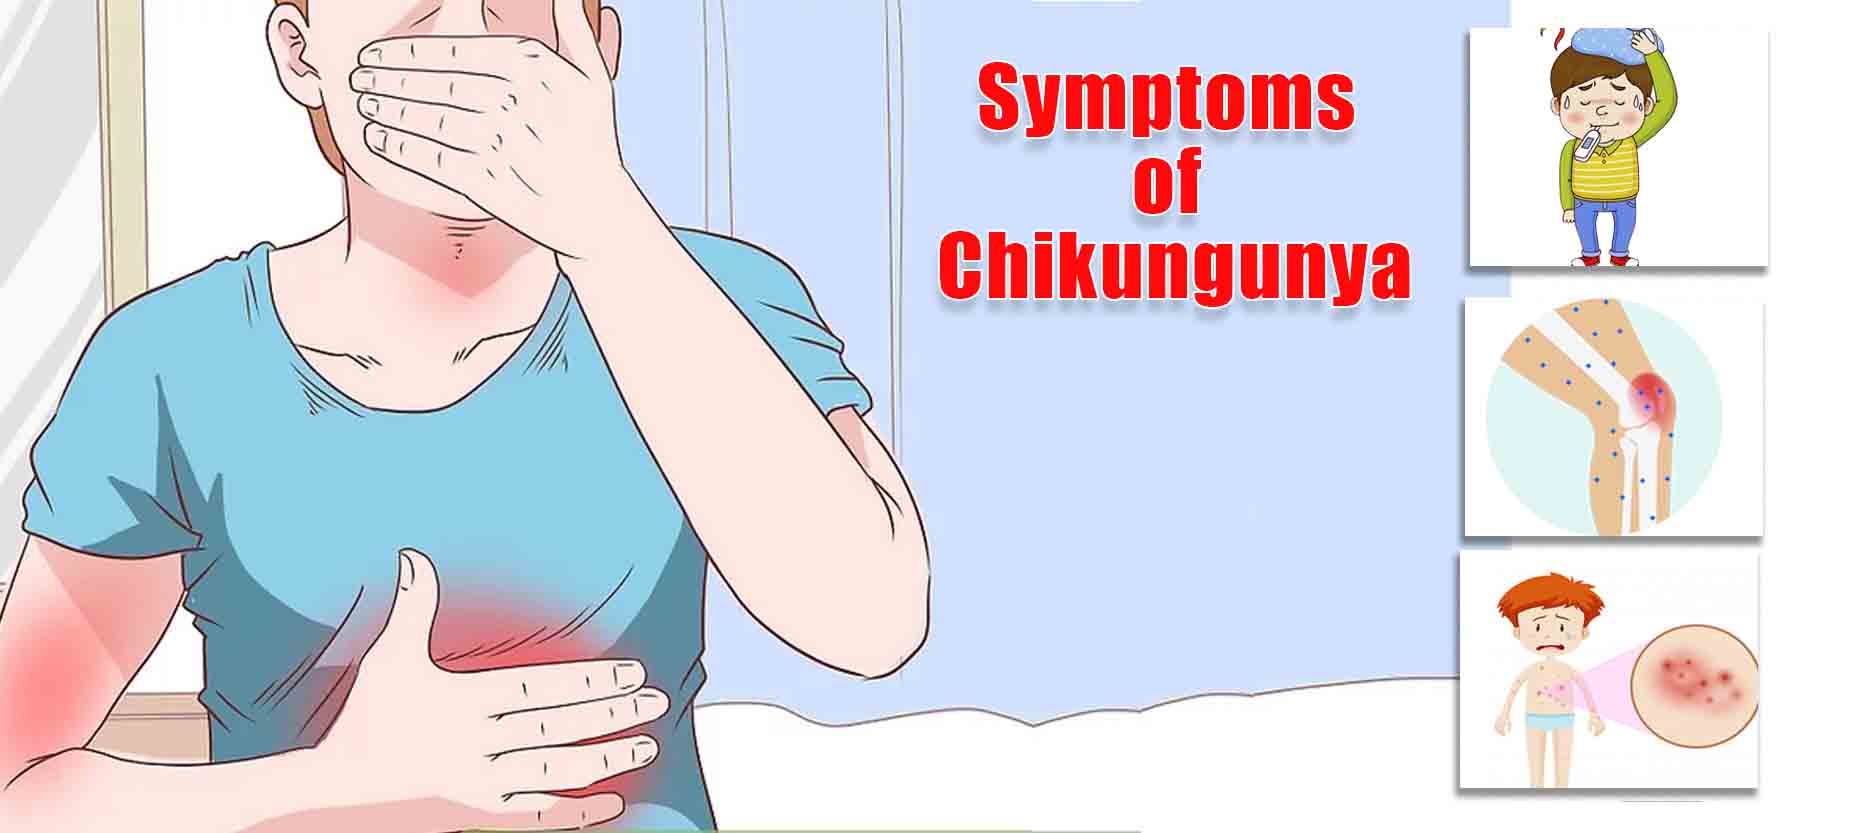 Chikungunya Virus: Signs and Symptoms, Treatment and Prevention